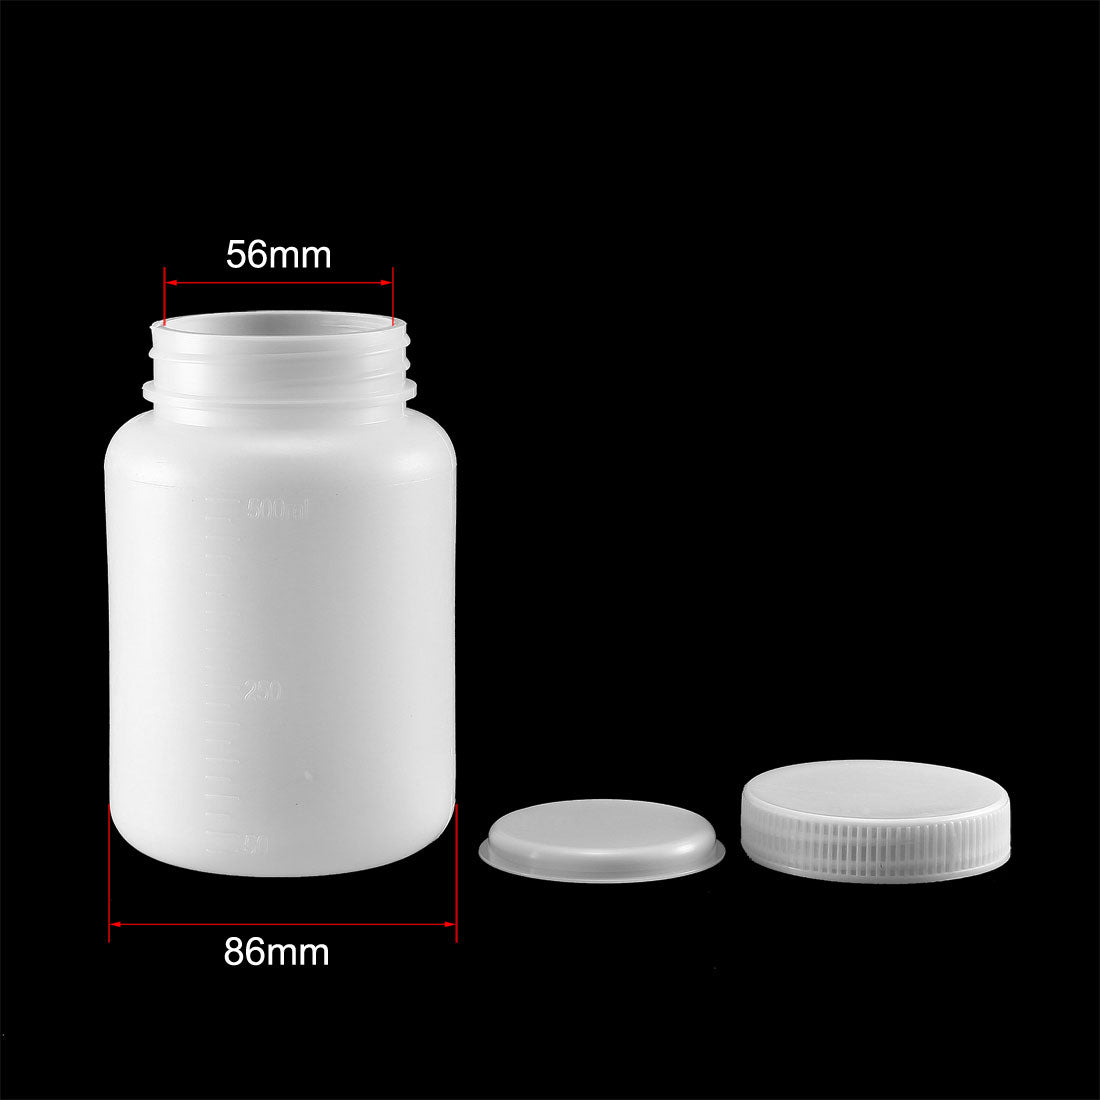 Uxcell Uxcell Plastic Lab Chemical Reagent Bottle 1000ml/34oz Wide Mouth Sample Sealing Liquid Storage Container 5pcs